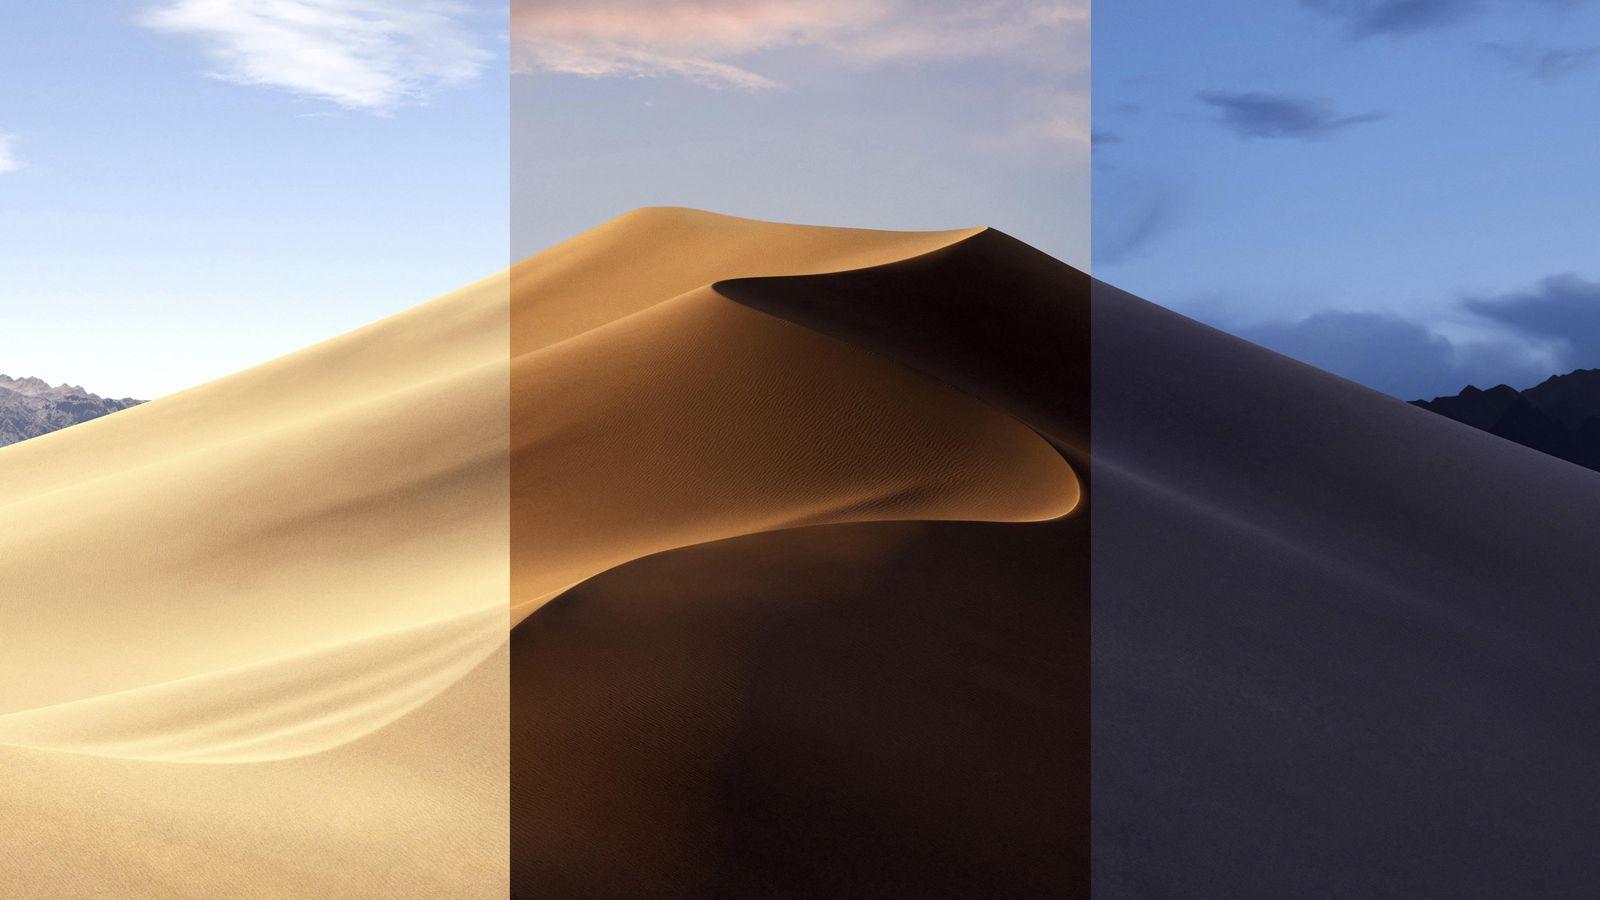 Get MacOS Mojave's awesome Dynamic desktop wallpaper without